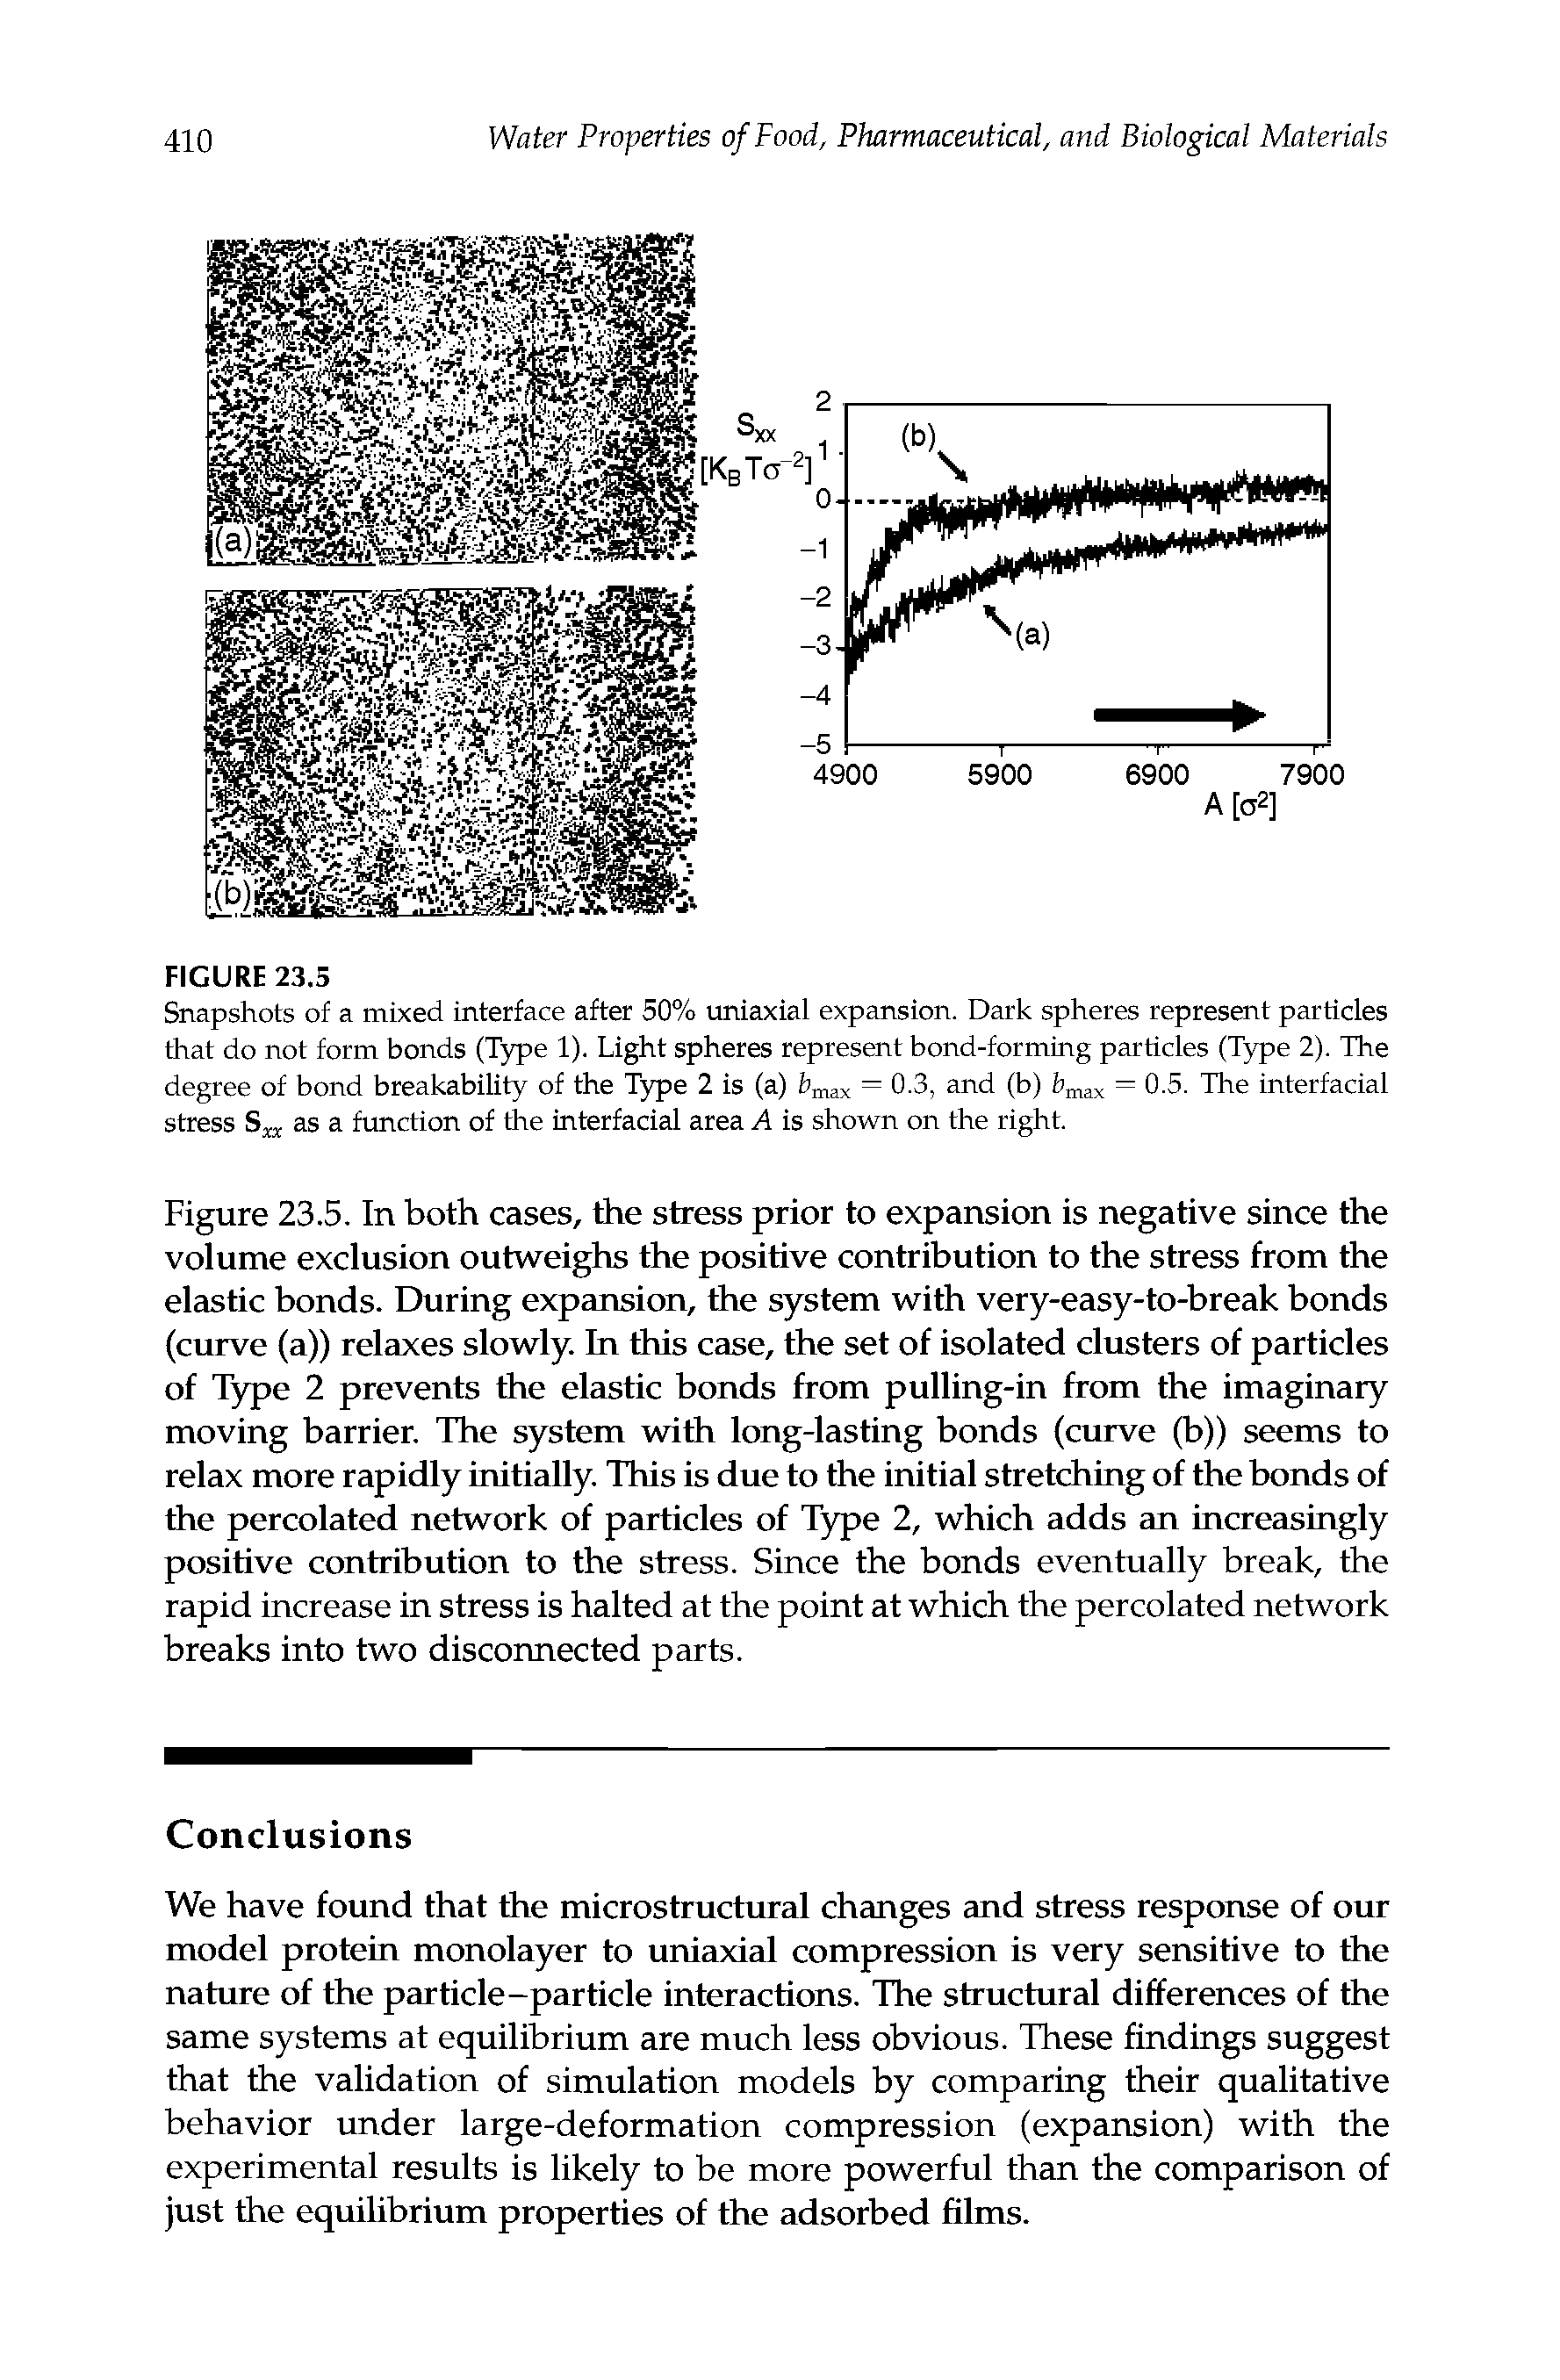 Figure 23.5. In both cases, the stress prior to expansion is negative since the volume exclusion outweighs the positive contribution to the stress from the elastic bonds. During expansion, the system with very-easy-to-break bonds (curve (a)) relaxes slowly. In this case, the set of isolated clusters of particles of Type 2 prevents the elastic bonds from pulling-in from the imaginary moving barrier. The system with long-lasting bonds (curve (b)) seems to relax more rapidly initially. This is due to the initial stretching of the bonds of the percolated network of particles of Type 2, which adds an increasingly positive contribution to the stress. Since the bonds eventually break, the rapid increase in stress is halted at the point at which the percolated network breaks into two disconnected parts.